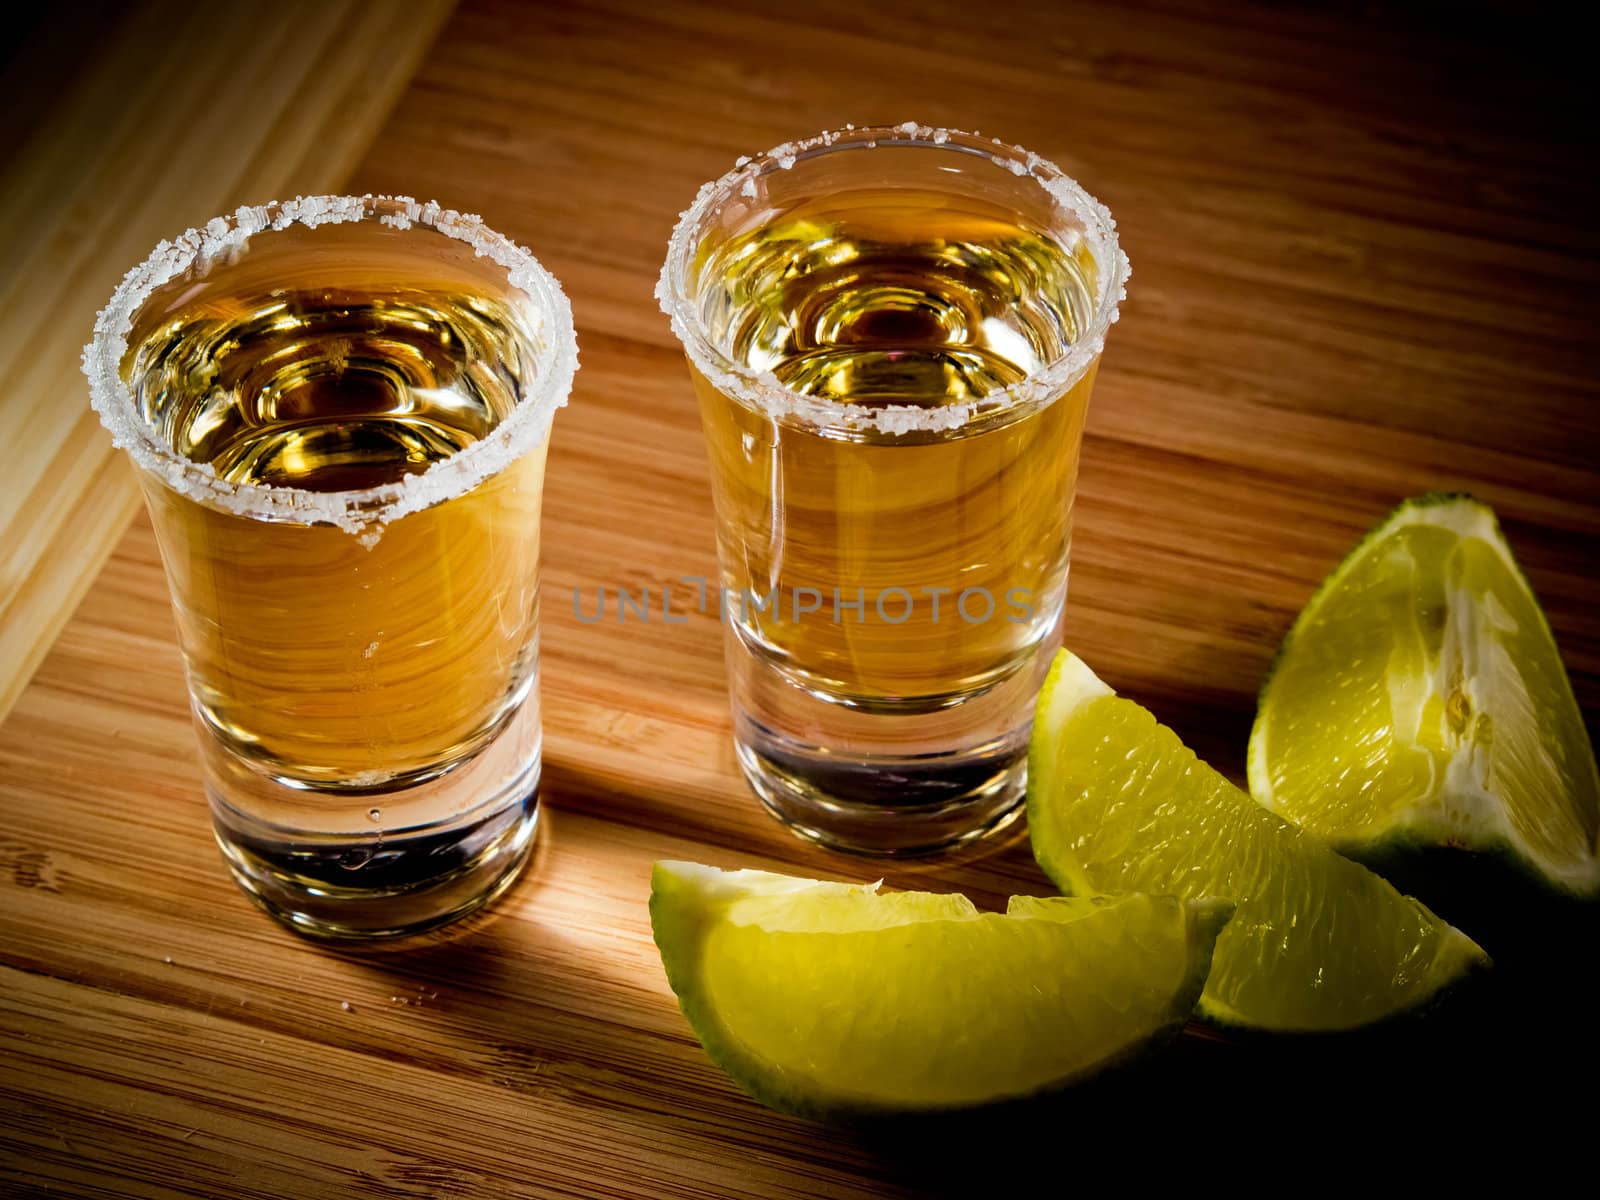 Two shot glasses of tequila with a rim of salt, and lime wedges